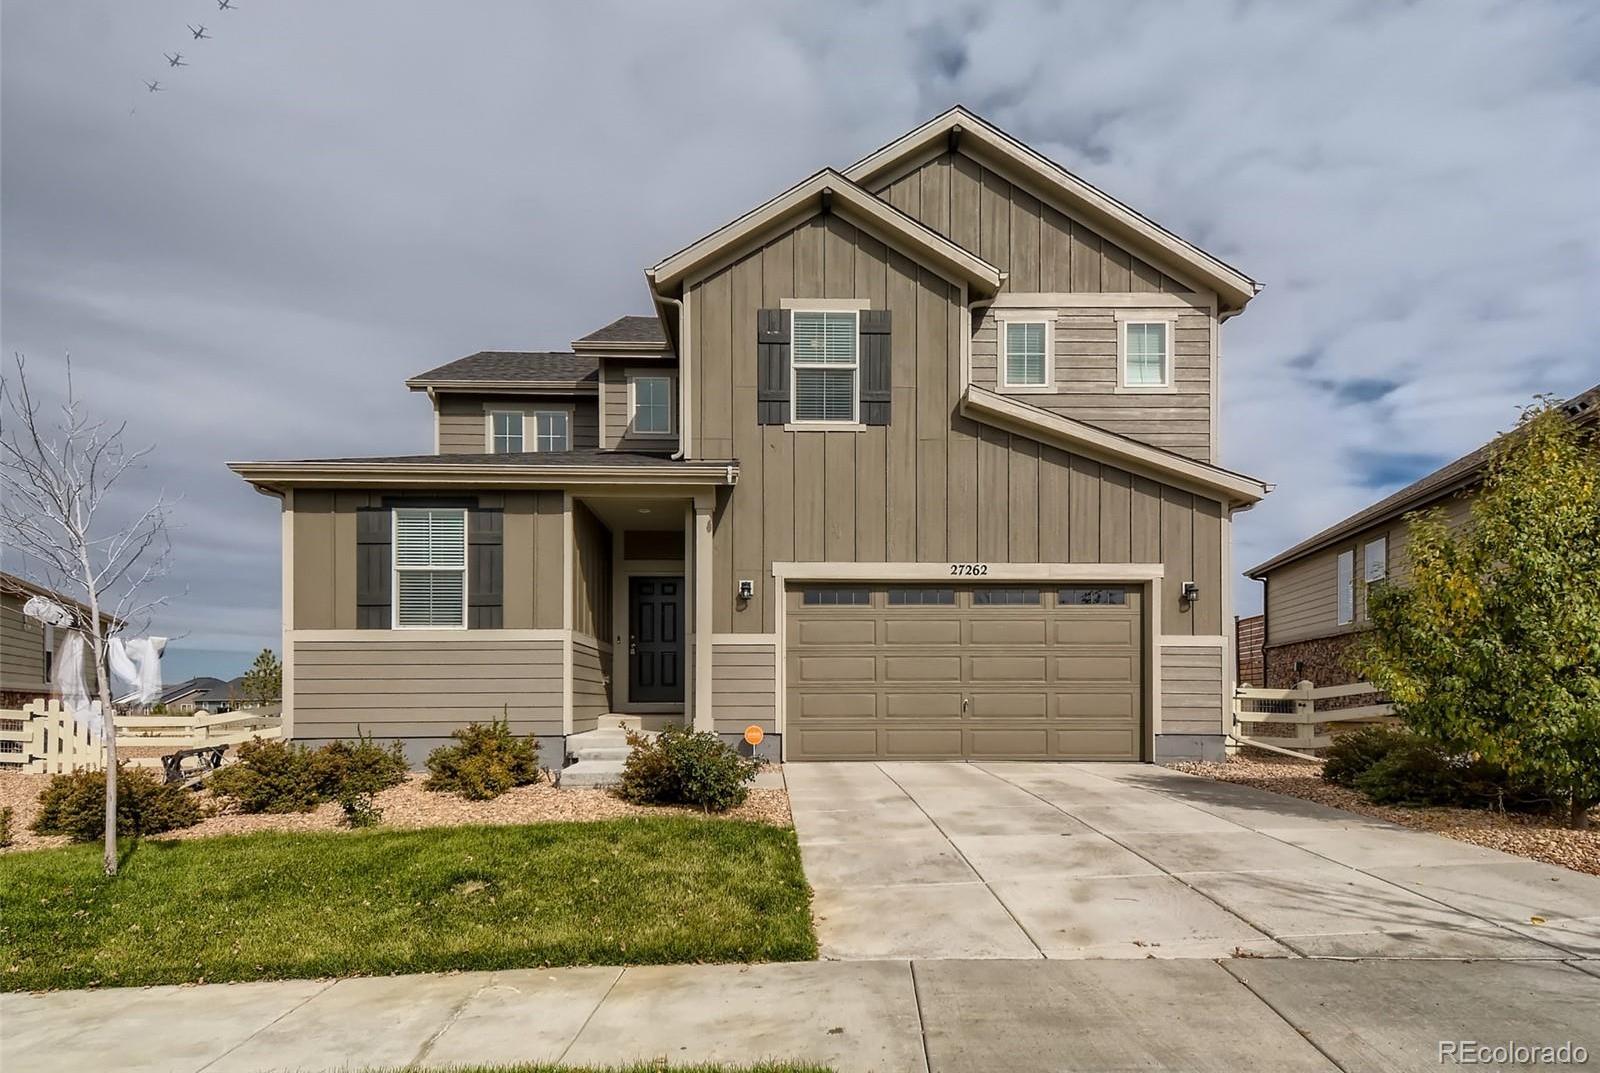 Photo one of 27262 E Frost Pl Aurora CO 80016 | MLS 5887101